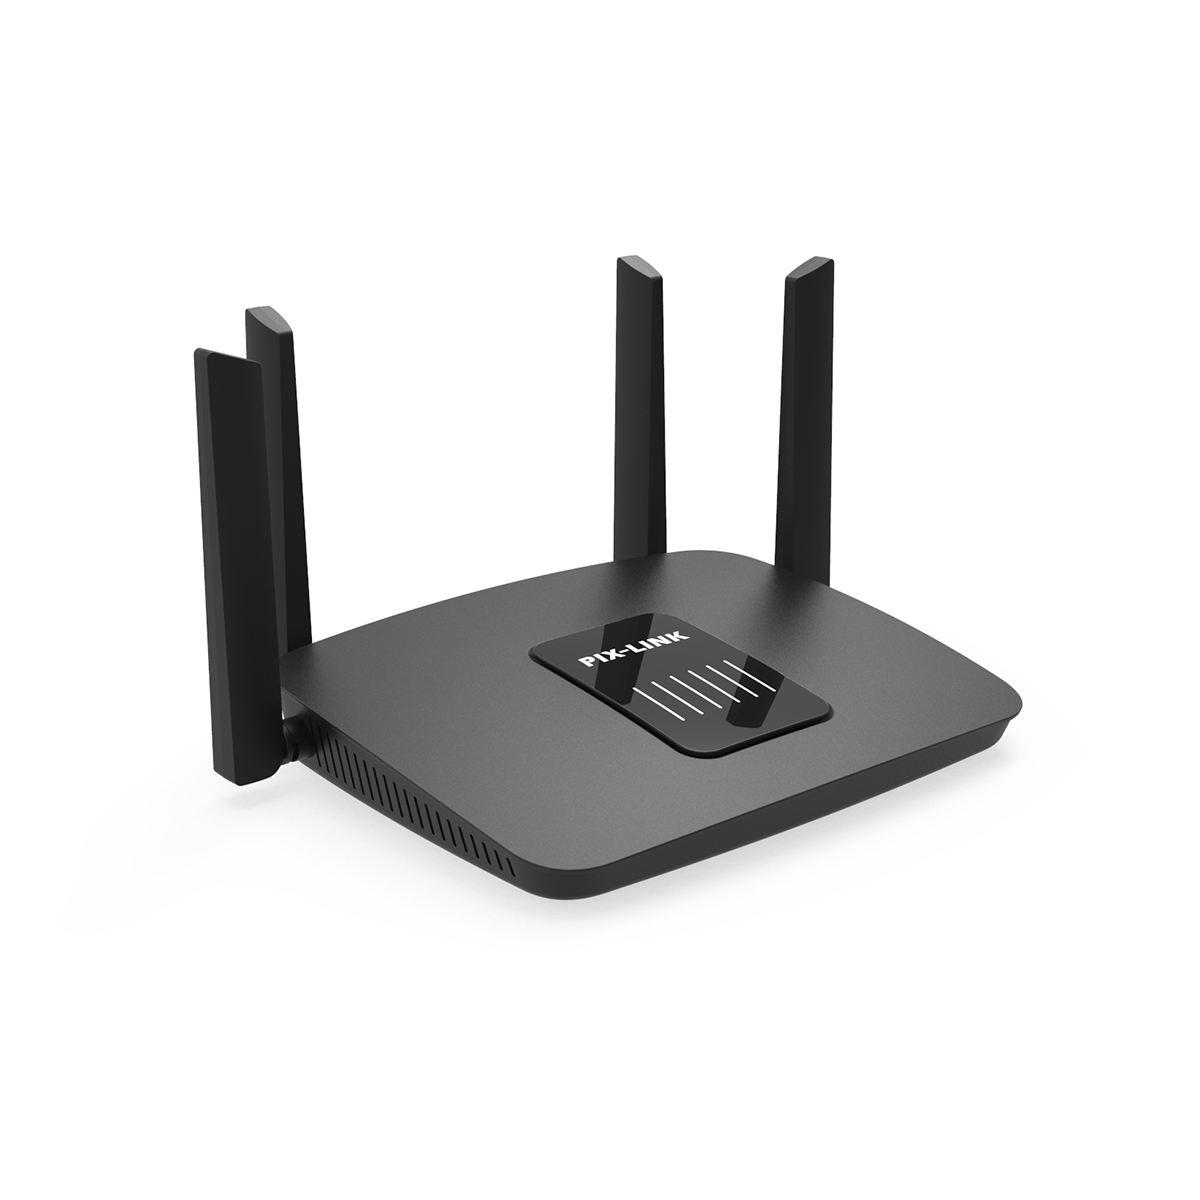 Find Pixlink 1200Mbps Wireless Router Dual Band WiFi Signal Booster Gigabit Repeater Signal Amplifier with 4 External Antennas LV AC06 for Sale on Gipsybee.com with cryptocurrencies